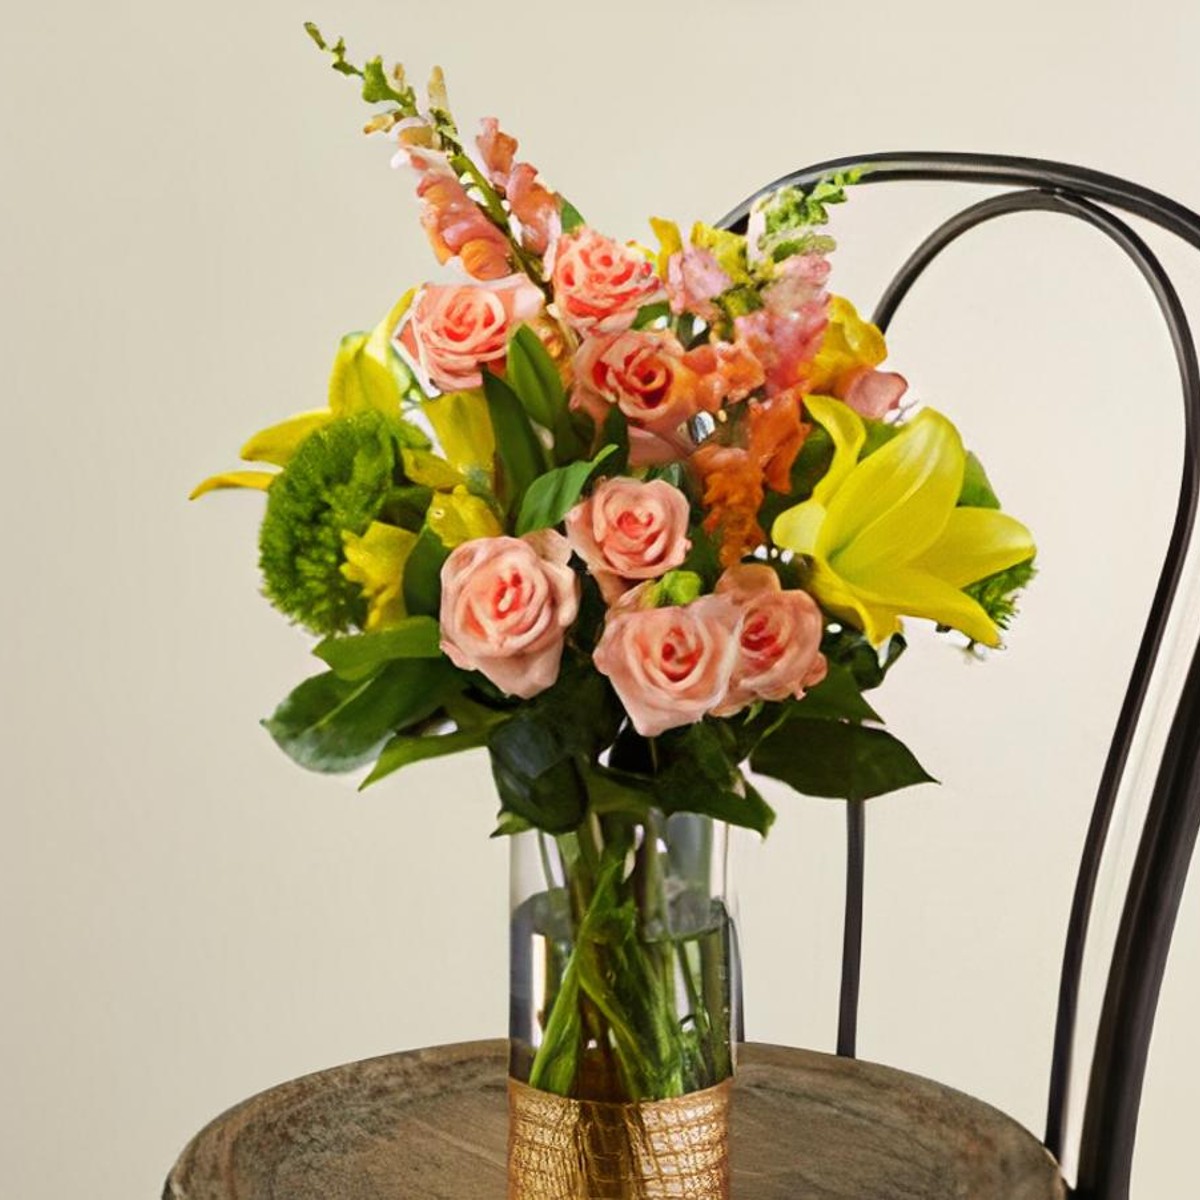 Illusions Floral & Gifts Llc The FTD® Calming Comfort™ Bouquet